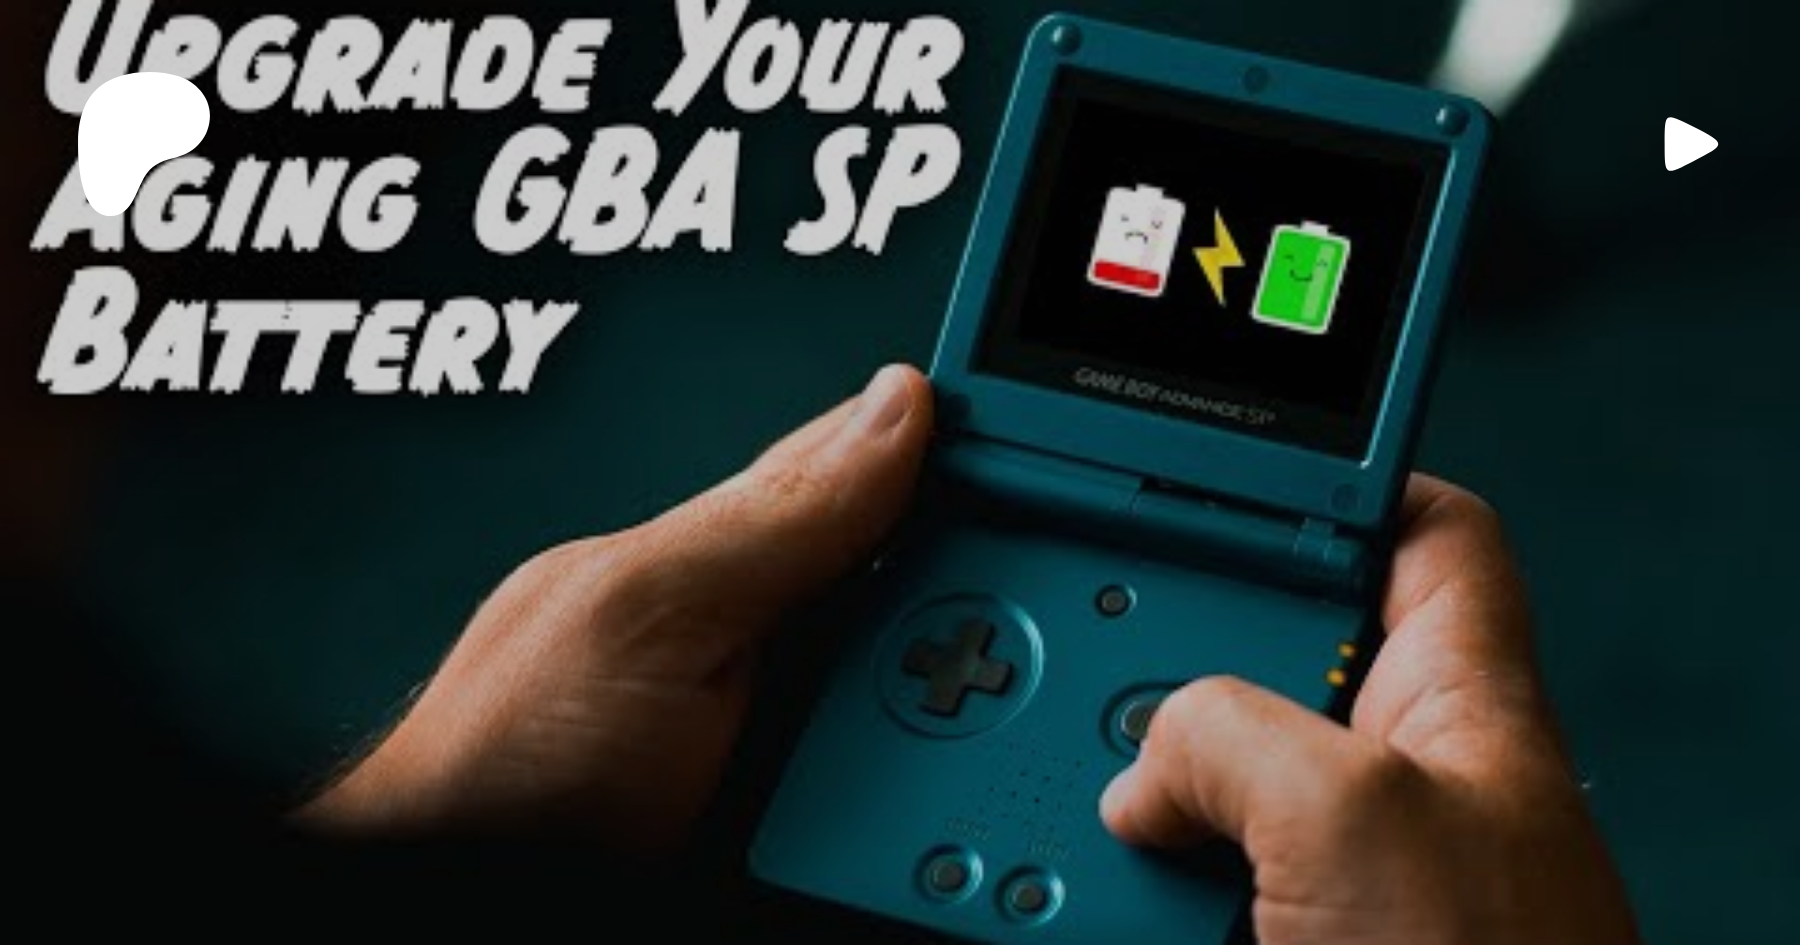 Upgrade Your Game Boy Advance SP Battery With the Megabat 800mAh